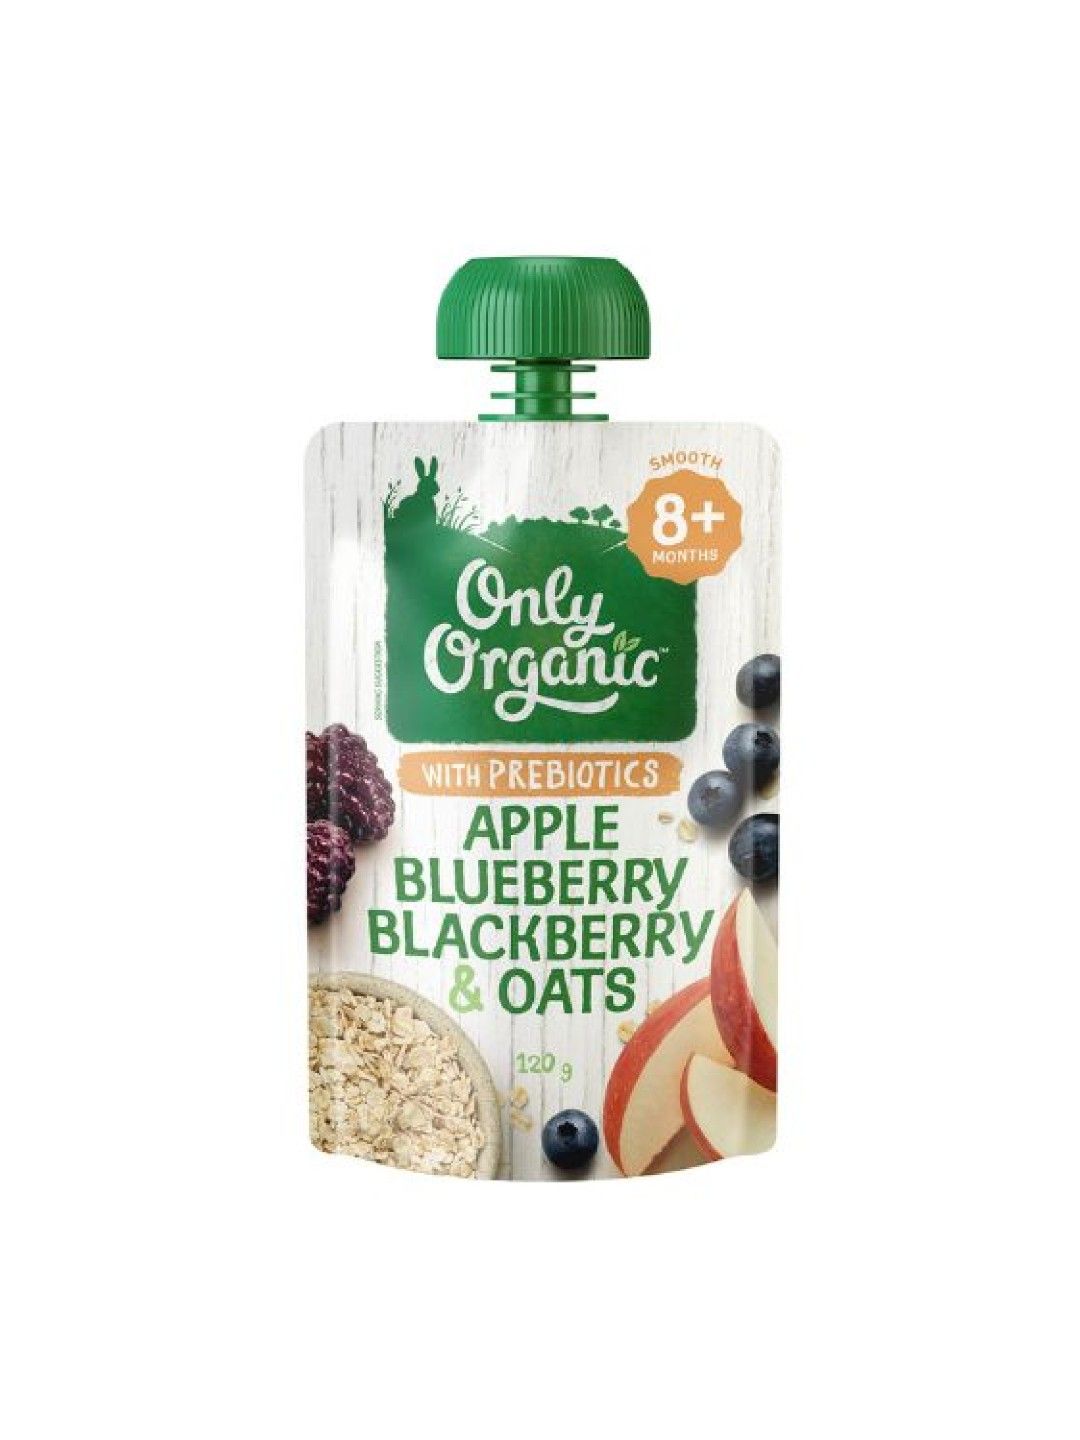 Only Organic Apple Blueberry Blackberry Oats (8+mos) 120g (No Color- Image 1)